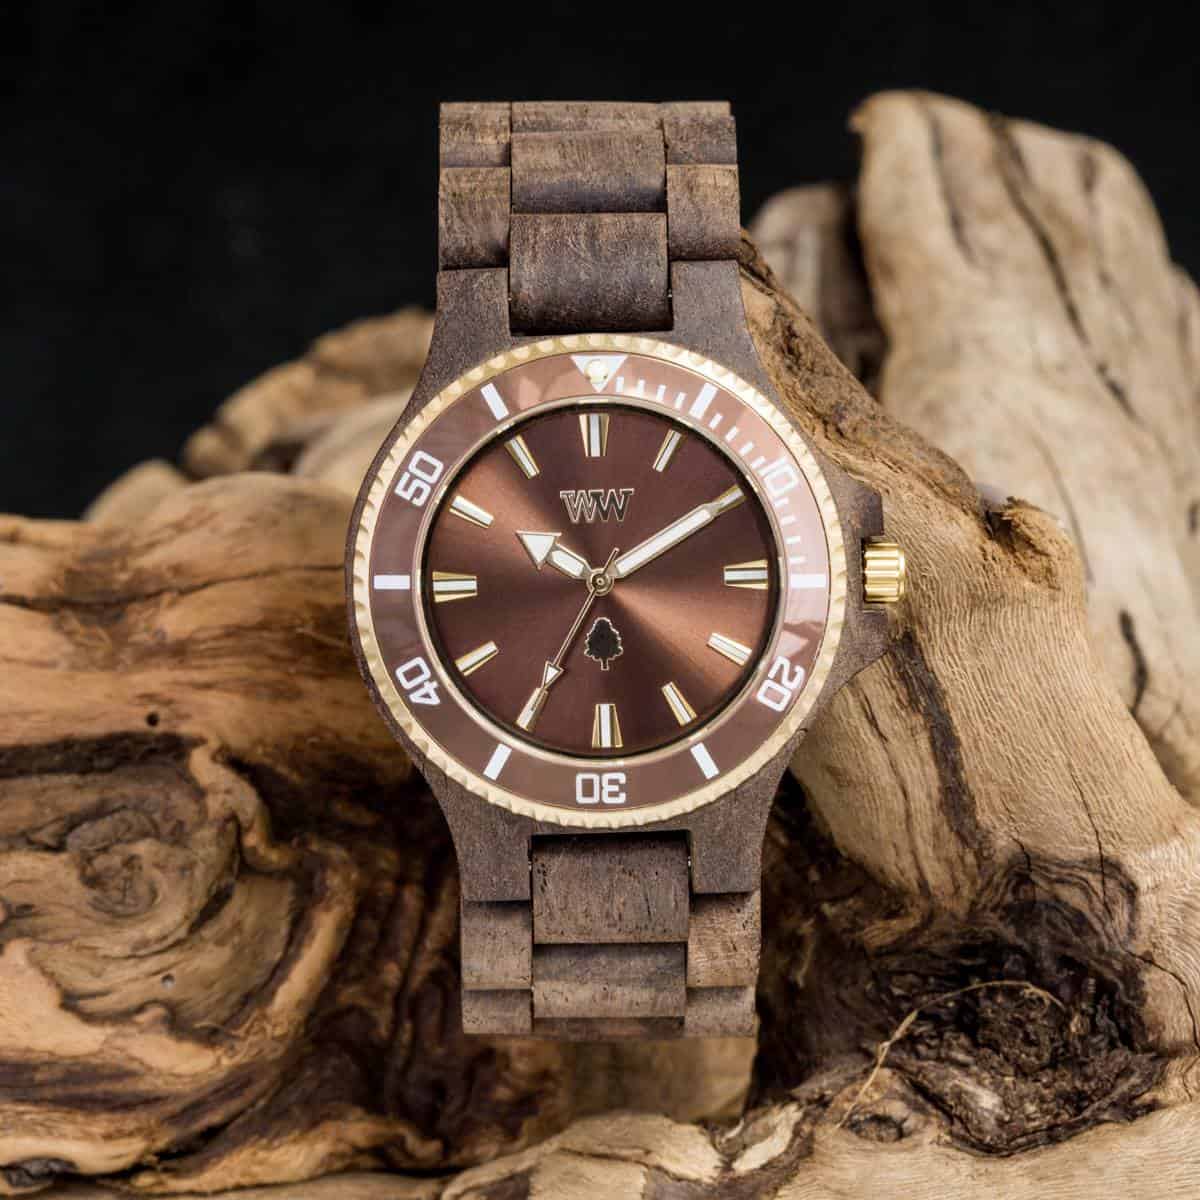 WeWOOD watches